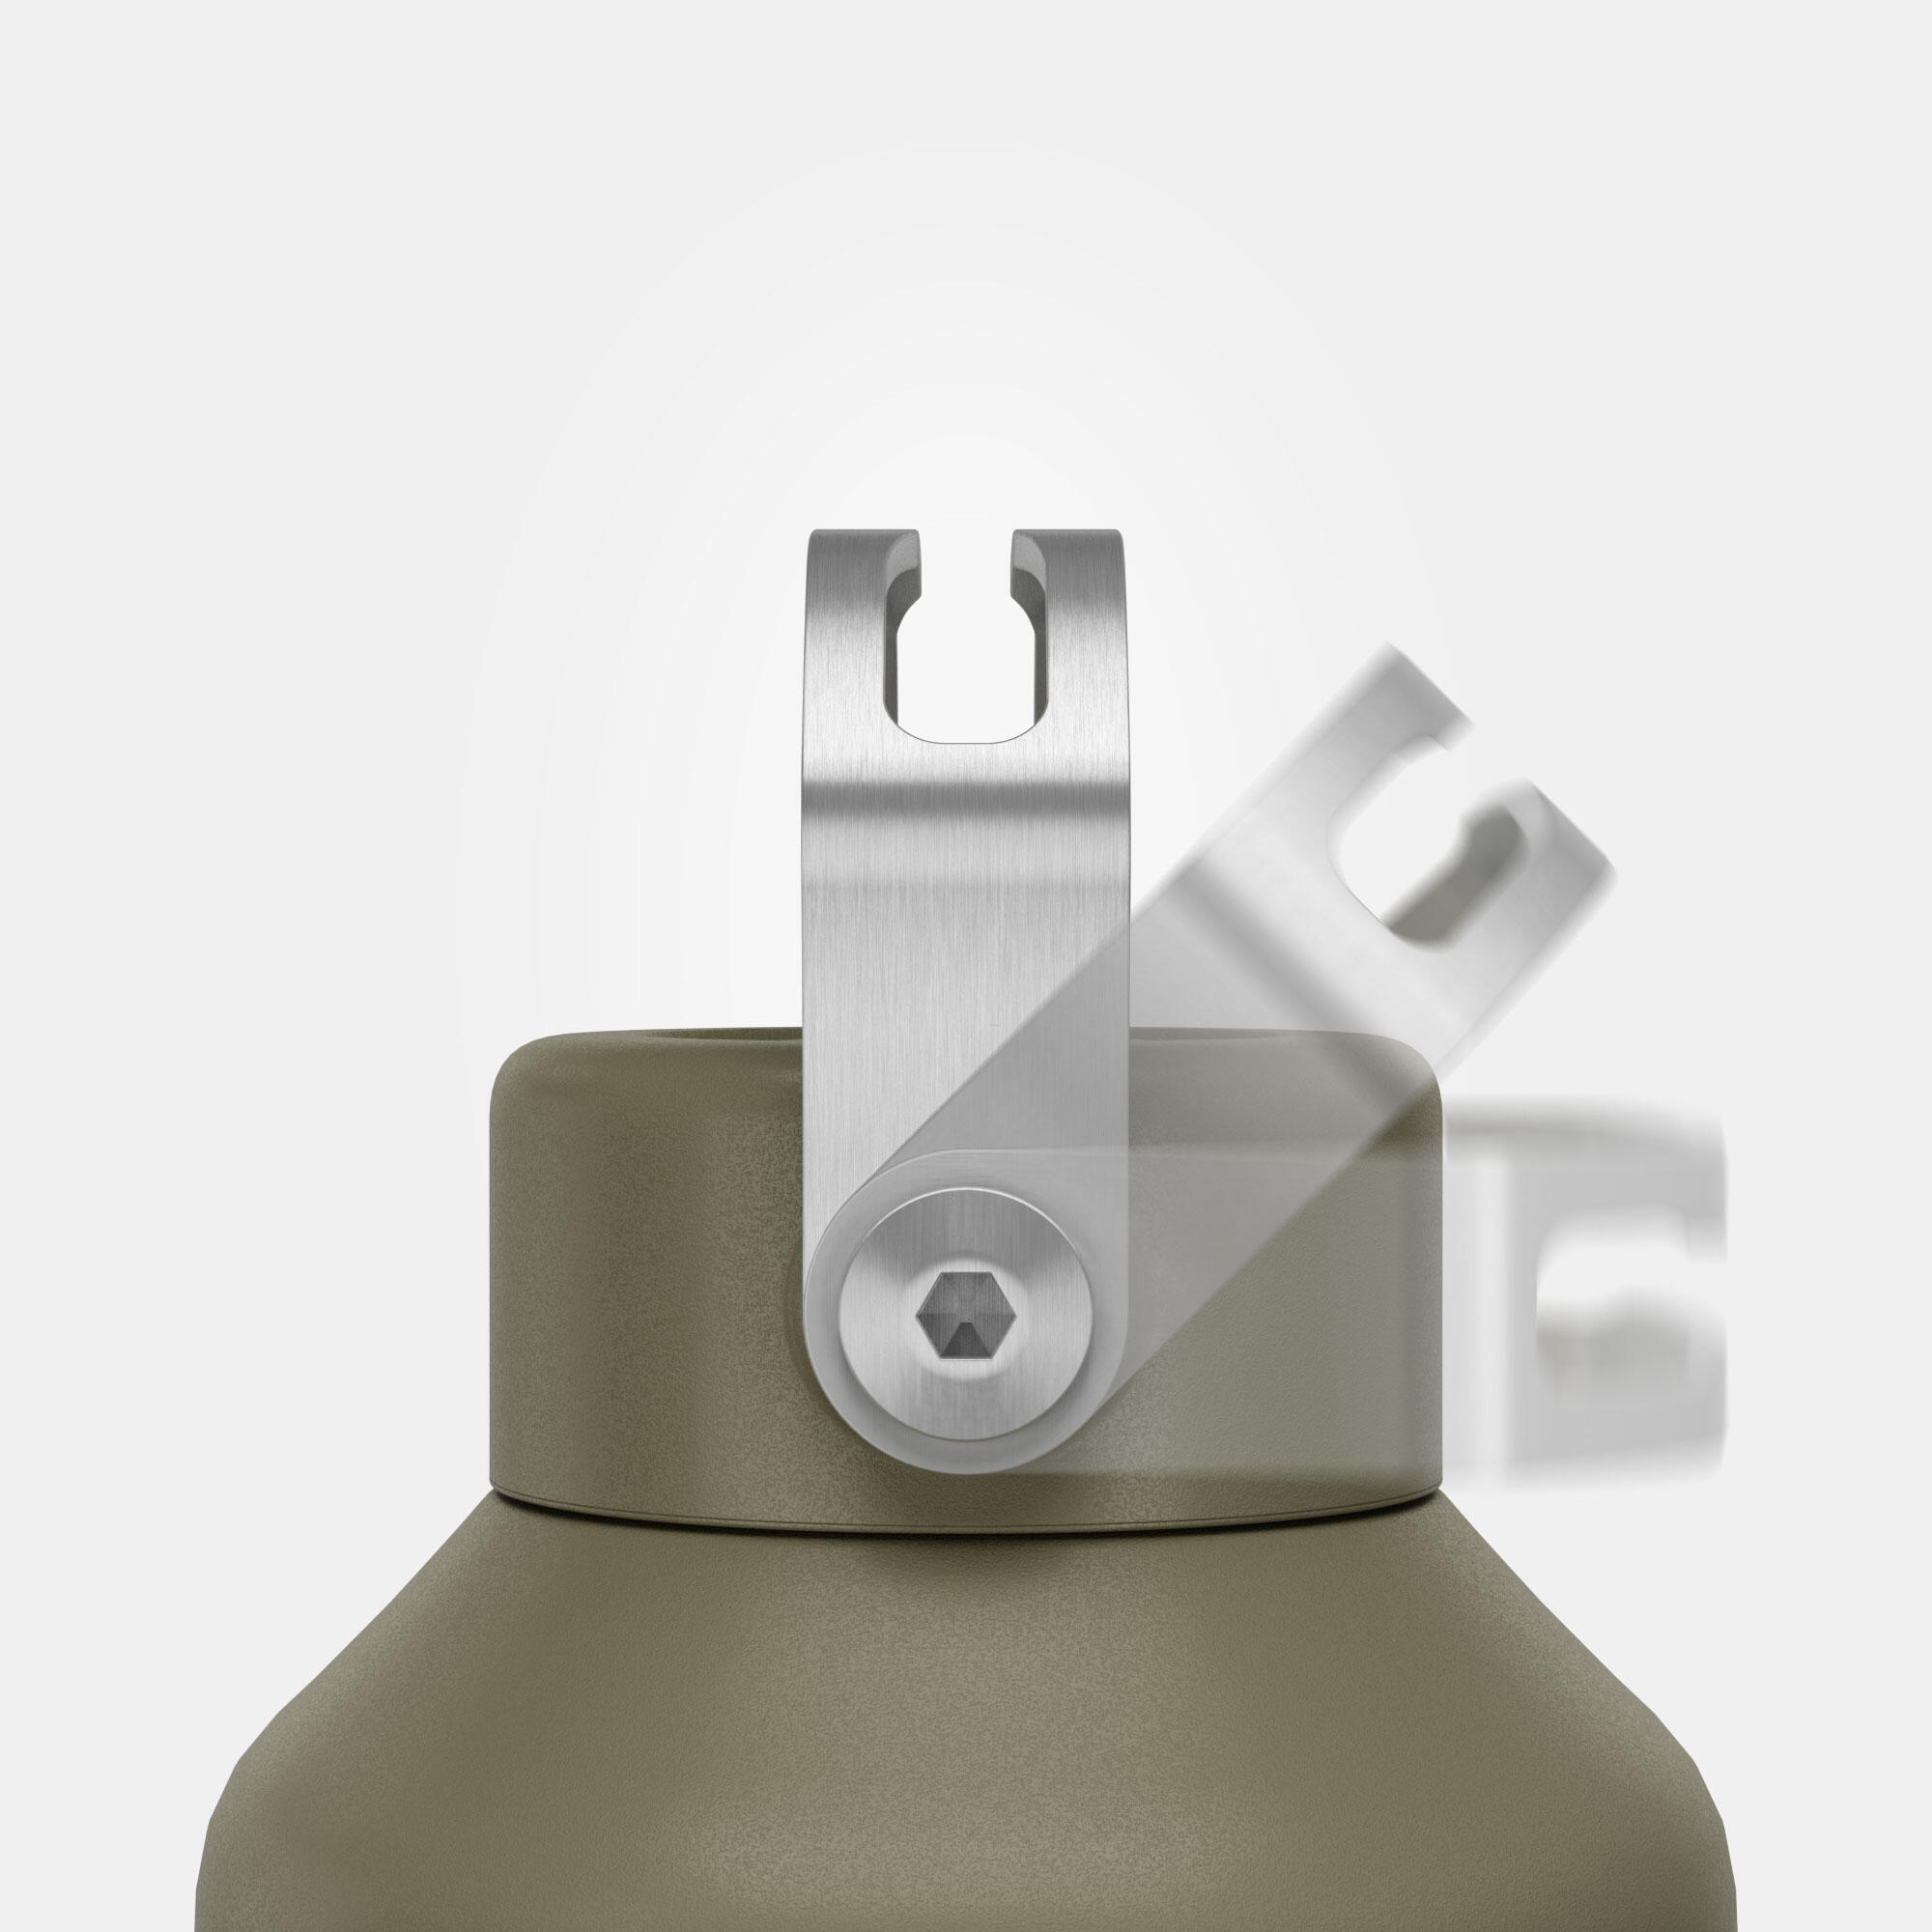 1.5 L stainless steel flask with screw cap for hiking - Khaki 5/10